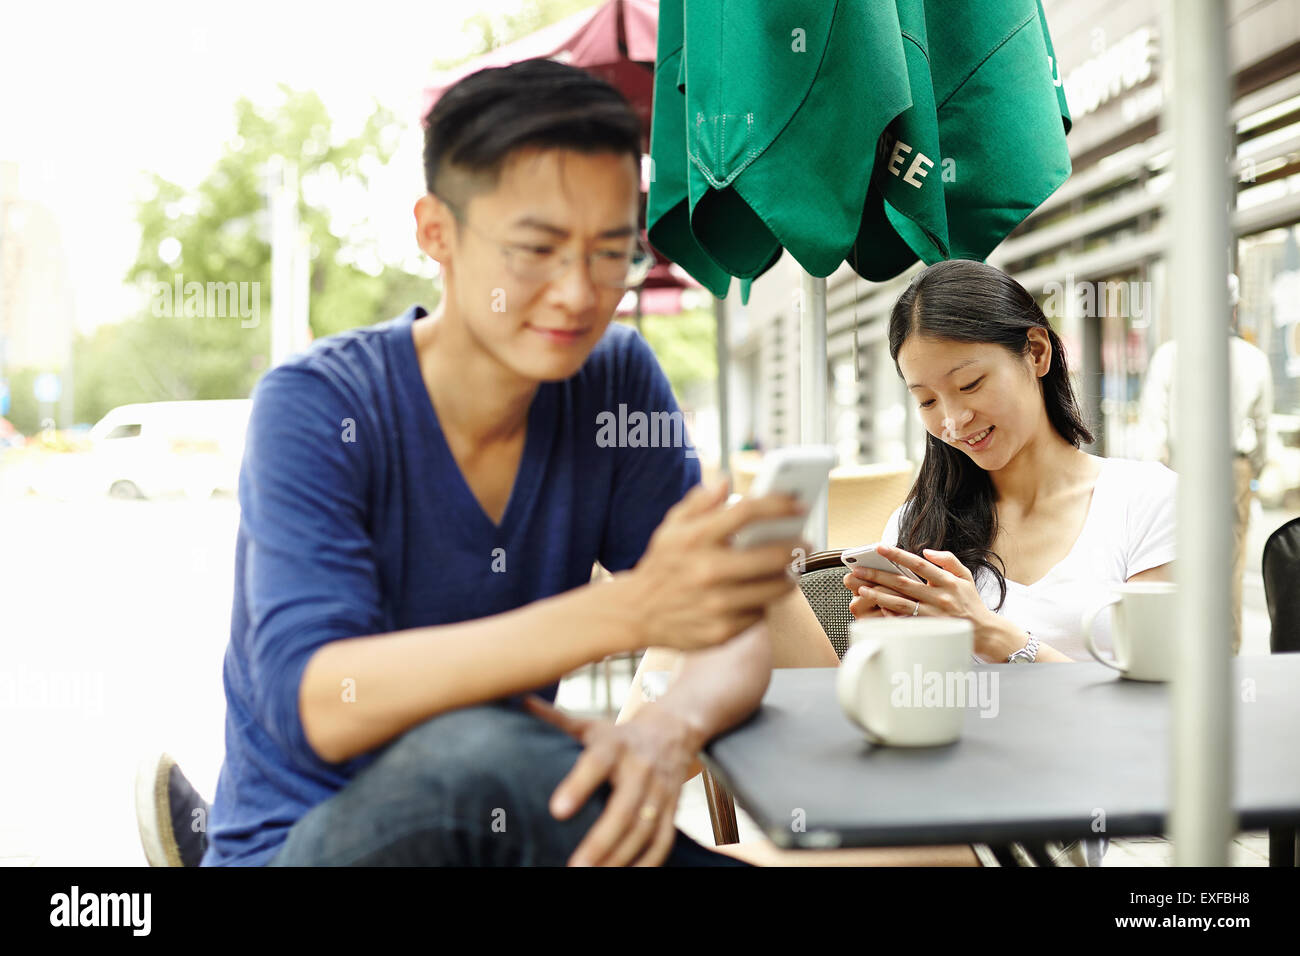 Tourist couple distracted by smartphones at sidewalk cafe, The Bund, Shanghai, China Stock Photo